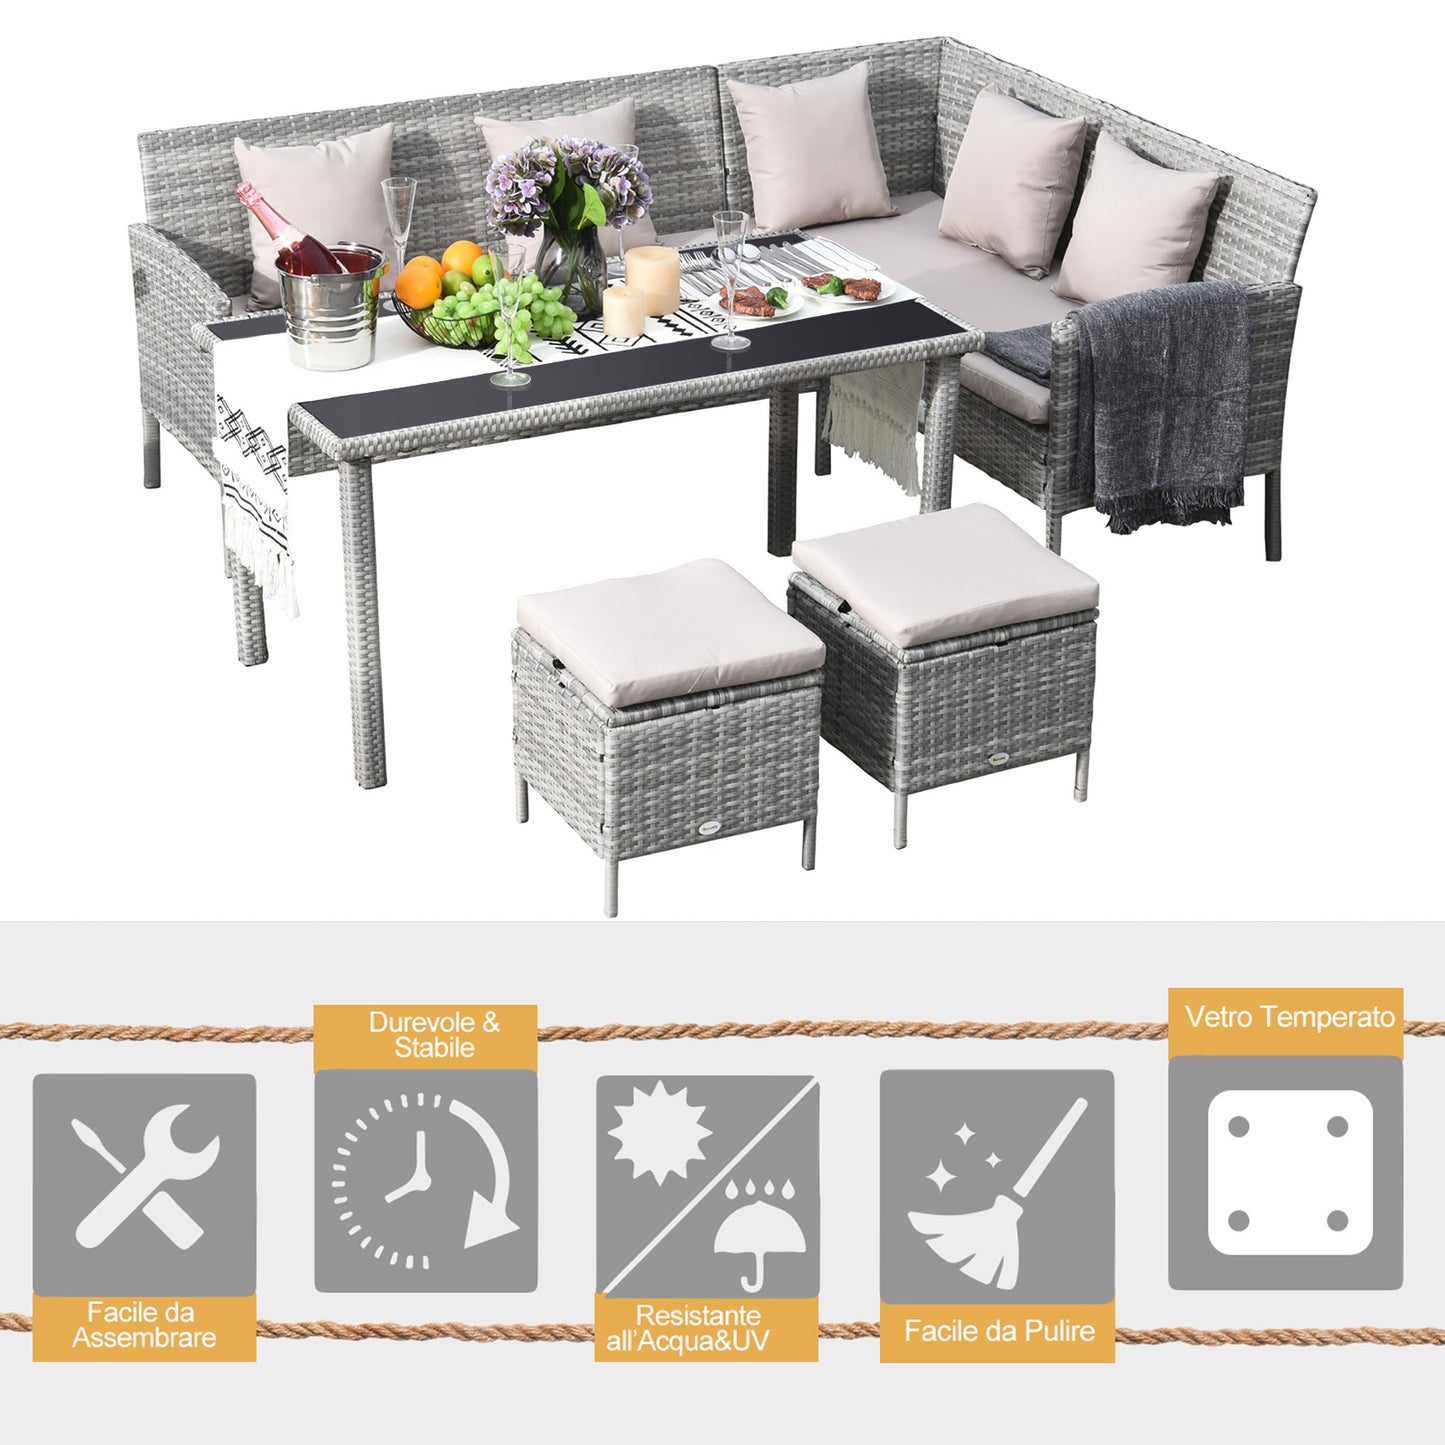 Outsunny 6-Seater Garden Outdoor Patio Rattan Corner Dining Set Wicker Sofa, Foot Stool, Dining Table with White Cushions, Mixed Grey